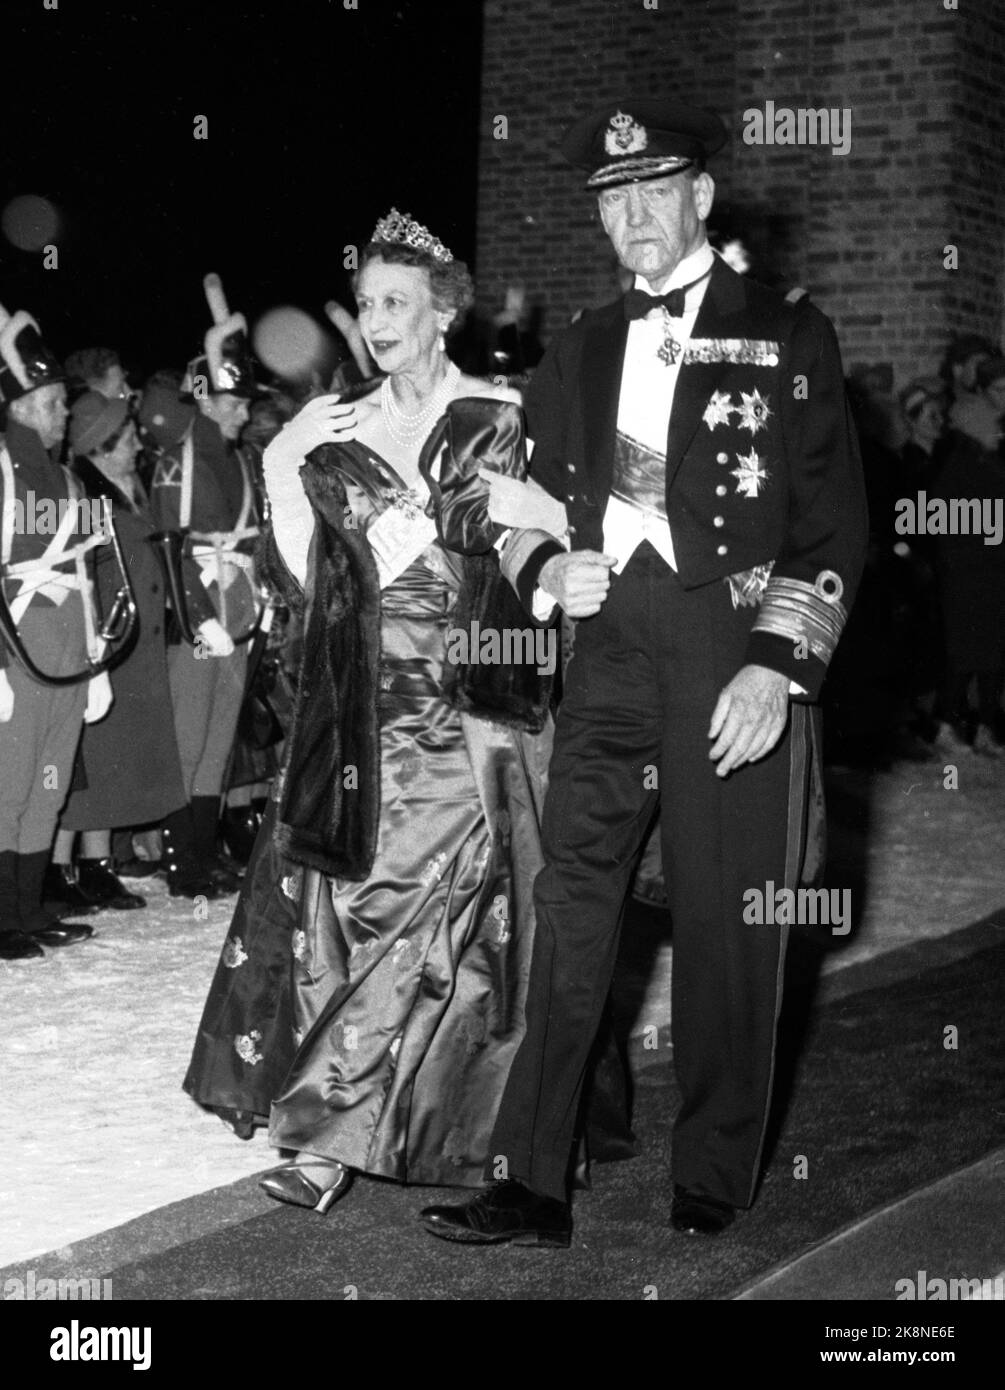 Asker 19610112. Princess Astrid's wedding. The guests leave the church. Here Princess Margaretha of Denmark, who is the aunt of the bride. She is accompanied by her husband, Prince Axel by Denmark. Margaretha wearing diadem / tiara. (Princess Margaretha was at her birth princess both by Sweden and Norway. Later she became a princess of Sweden, and after she got married: Princess of Denmark.) Photo: NTB / NTB Stock Photo